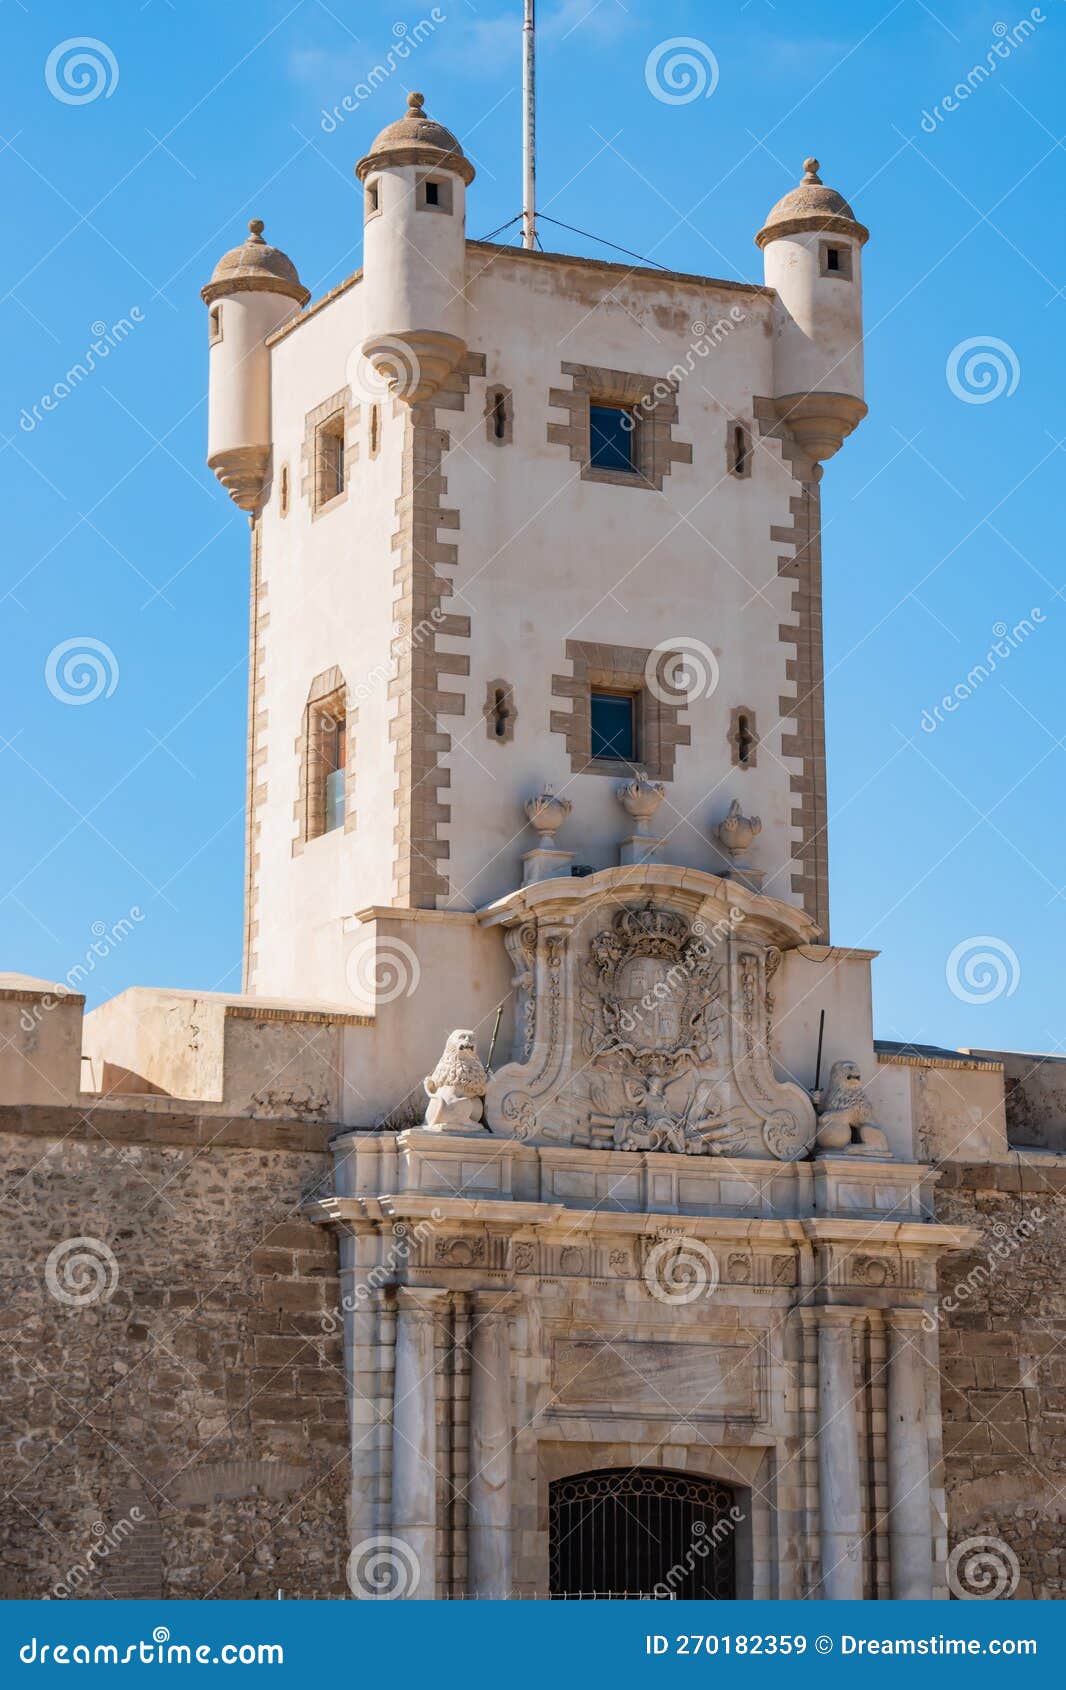 detail of the tower and portal of the puerta de tierra wall that divides the medieval and modern areas of cÃ¡diz, spain